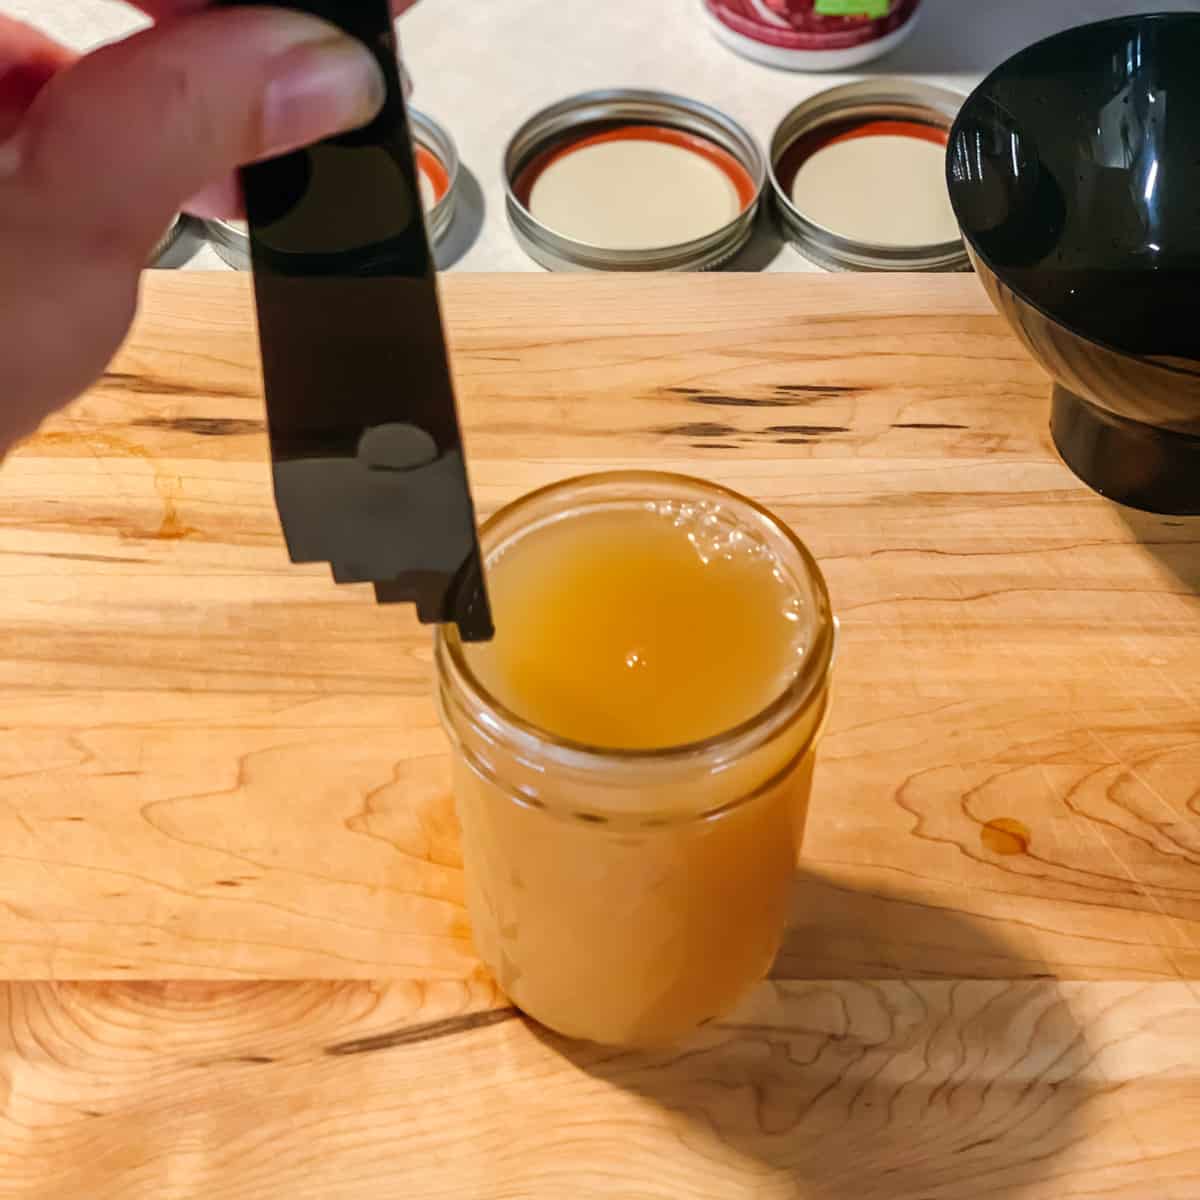 measuring the apple jelly headspace